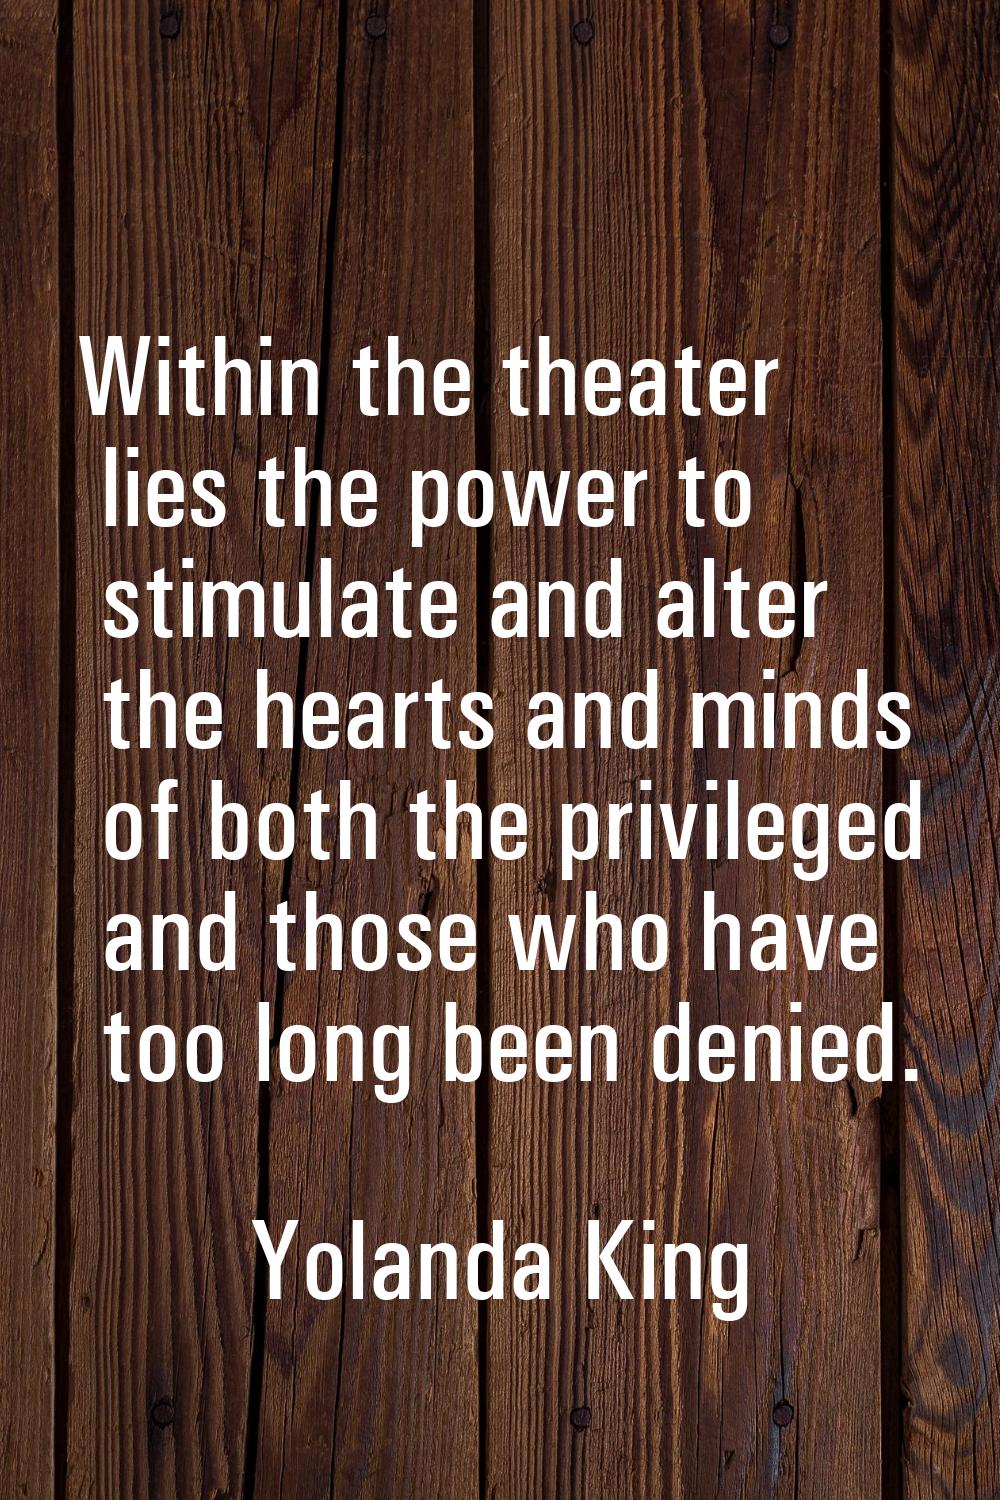 Within the theater lies the power to stimulate and alter the hearts and minds of both the privilege